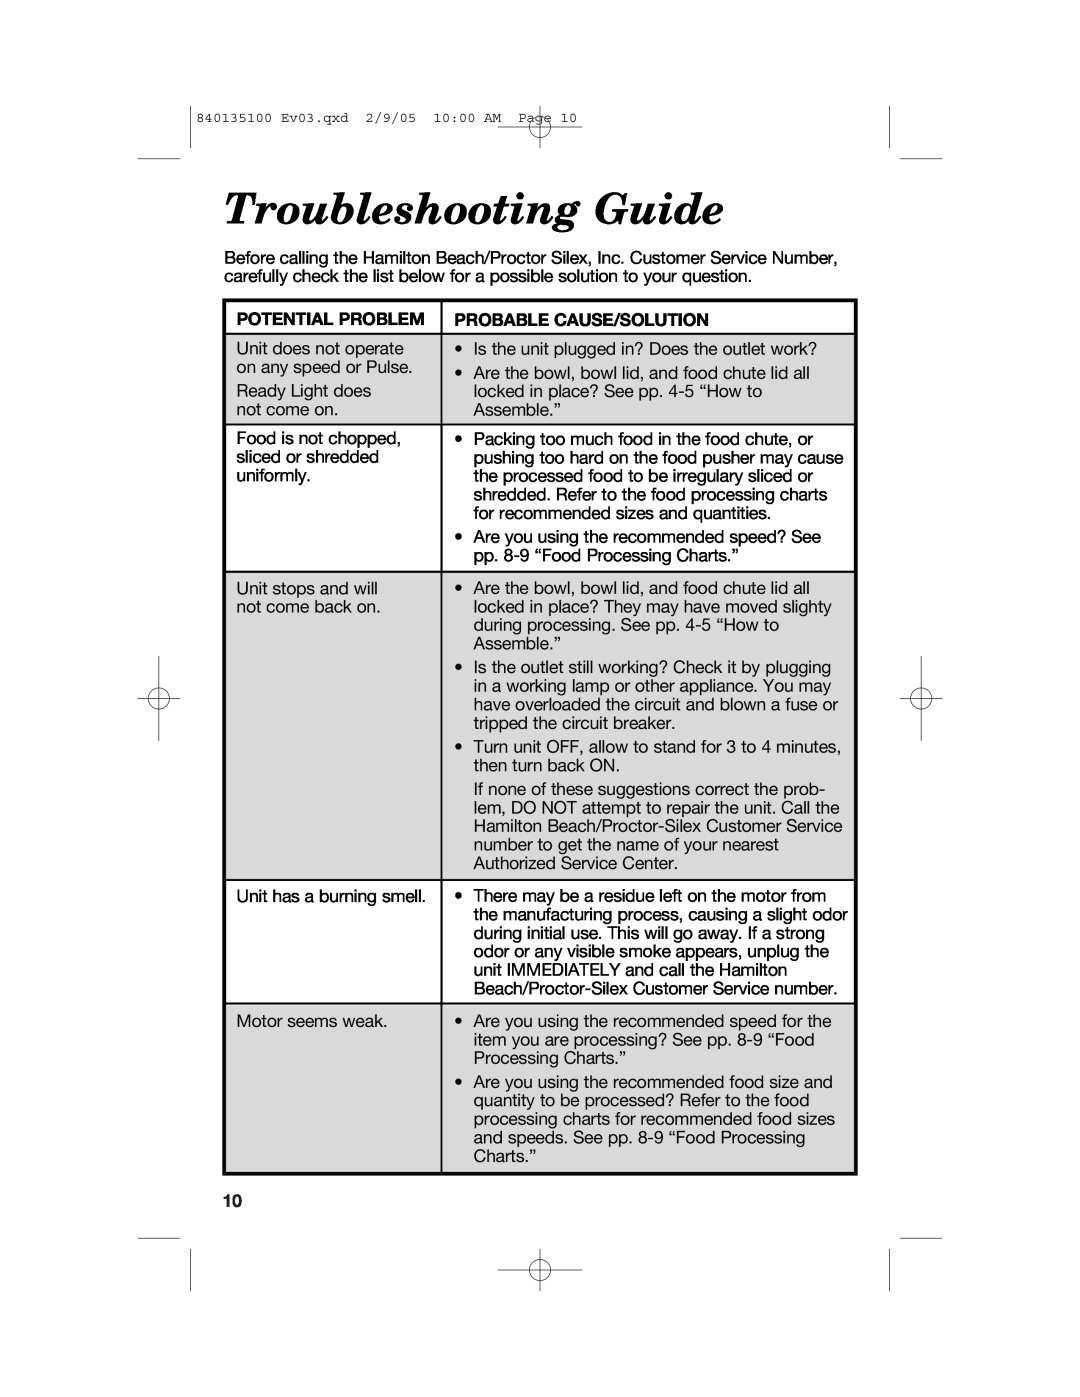 Hamilton Beach 840135100 manual Troubleshooting Guide, Potential Problem, Probable Cause/Solution 